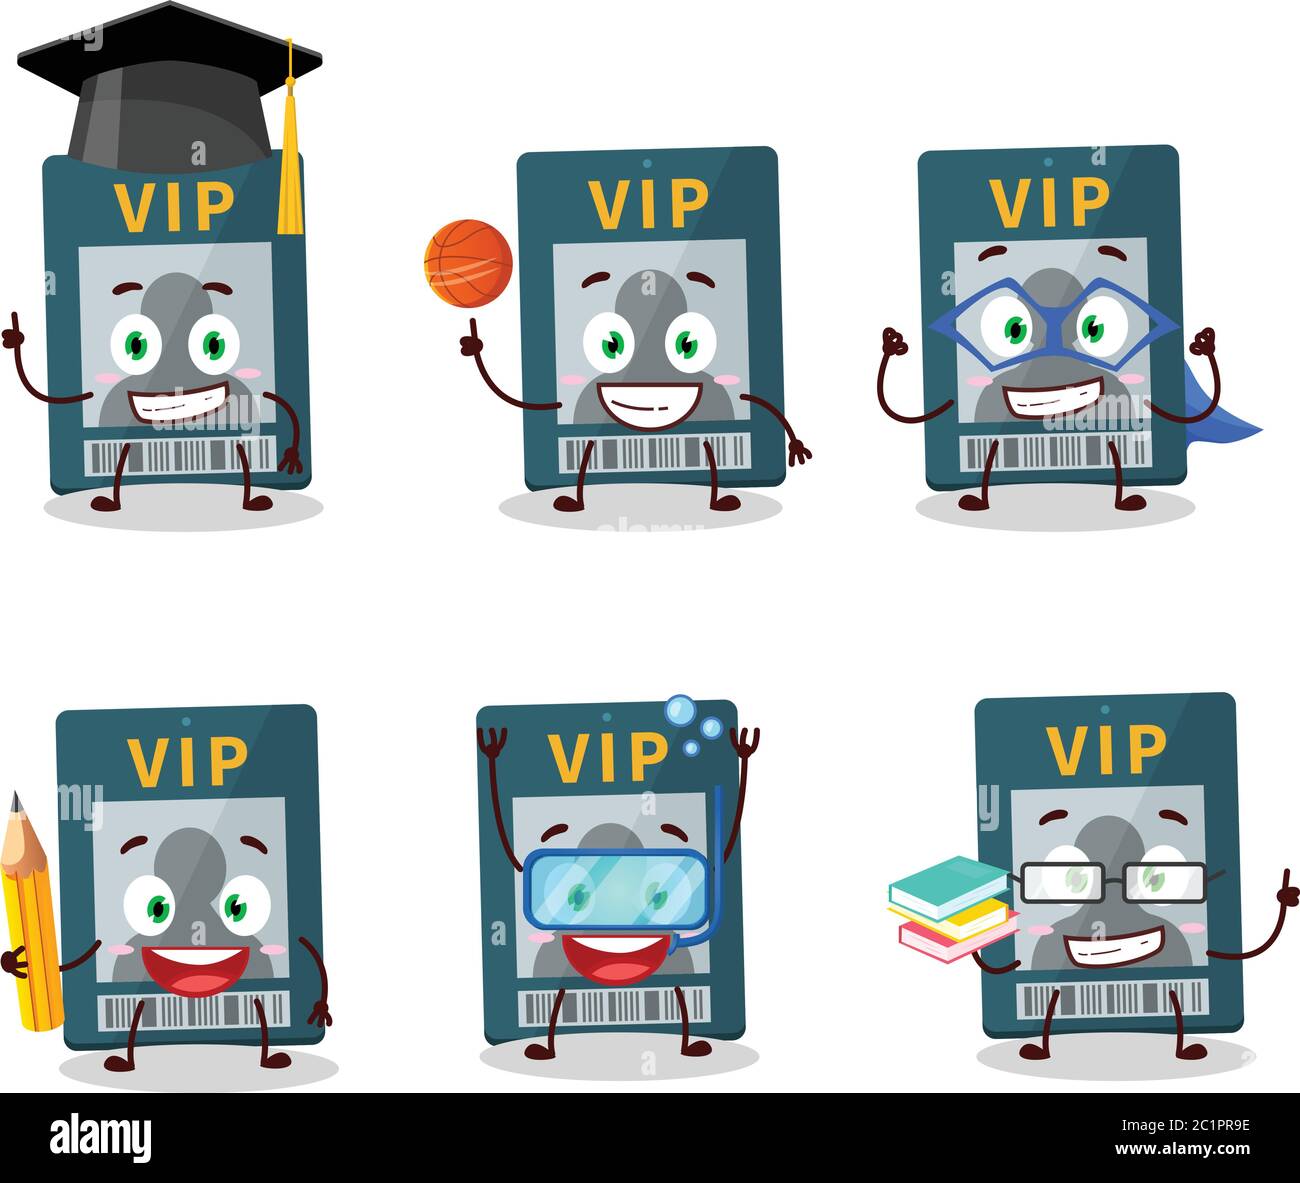 School student of vip card cartoon character with various expressions Stock Vector